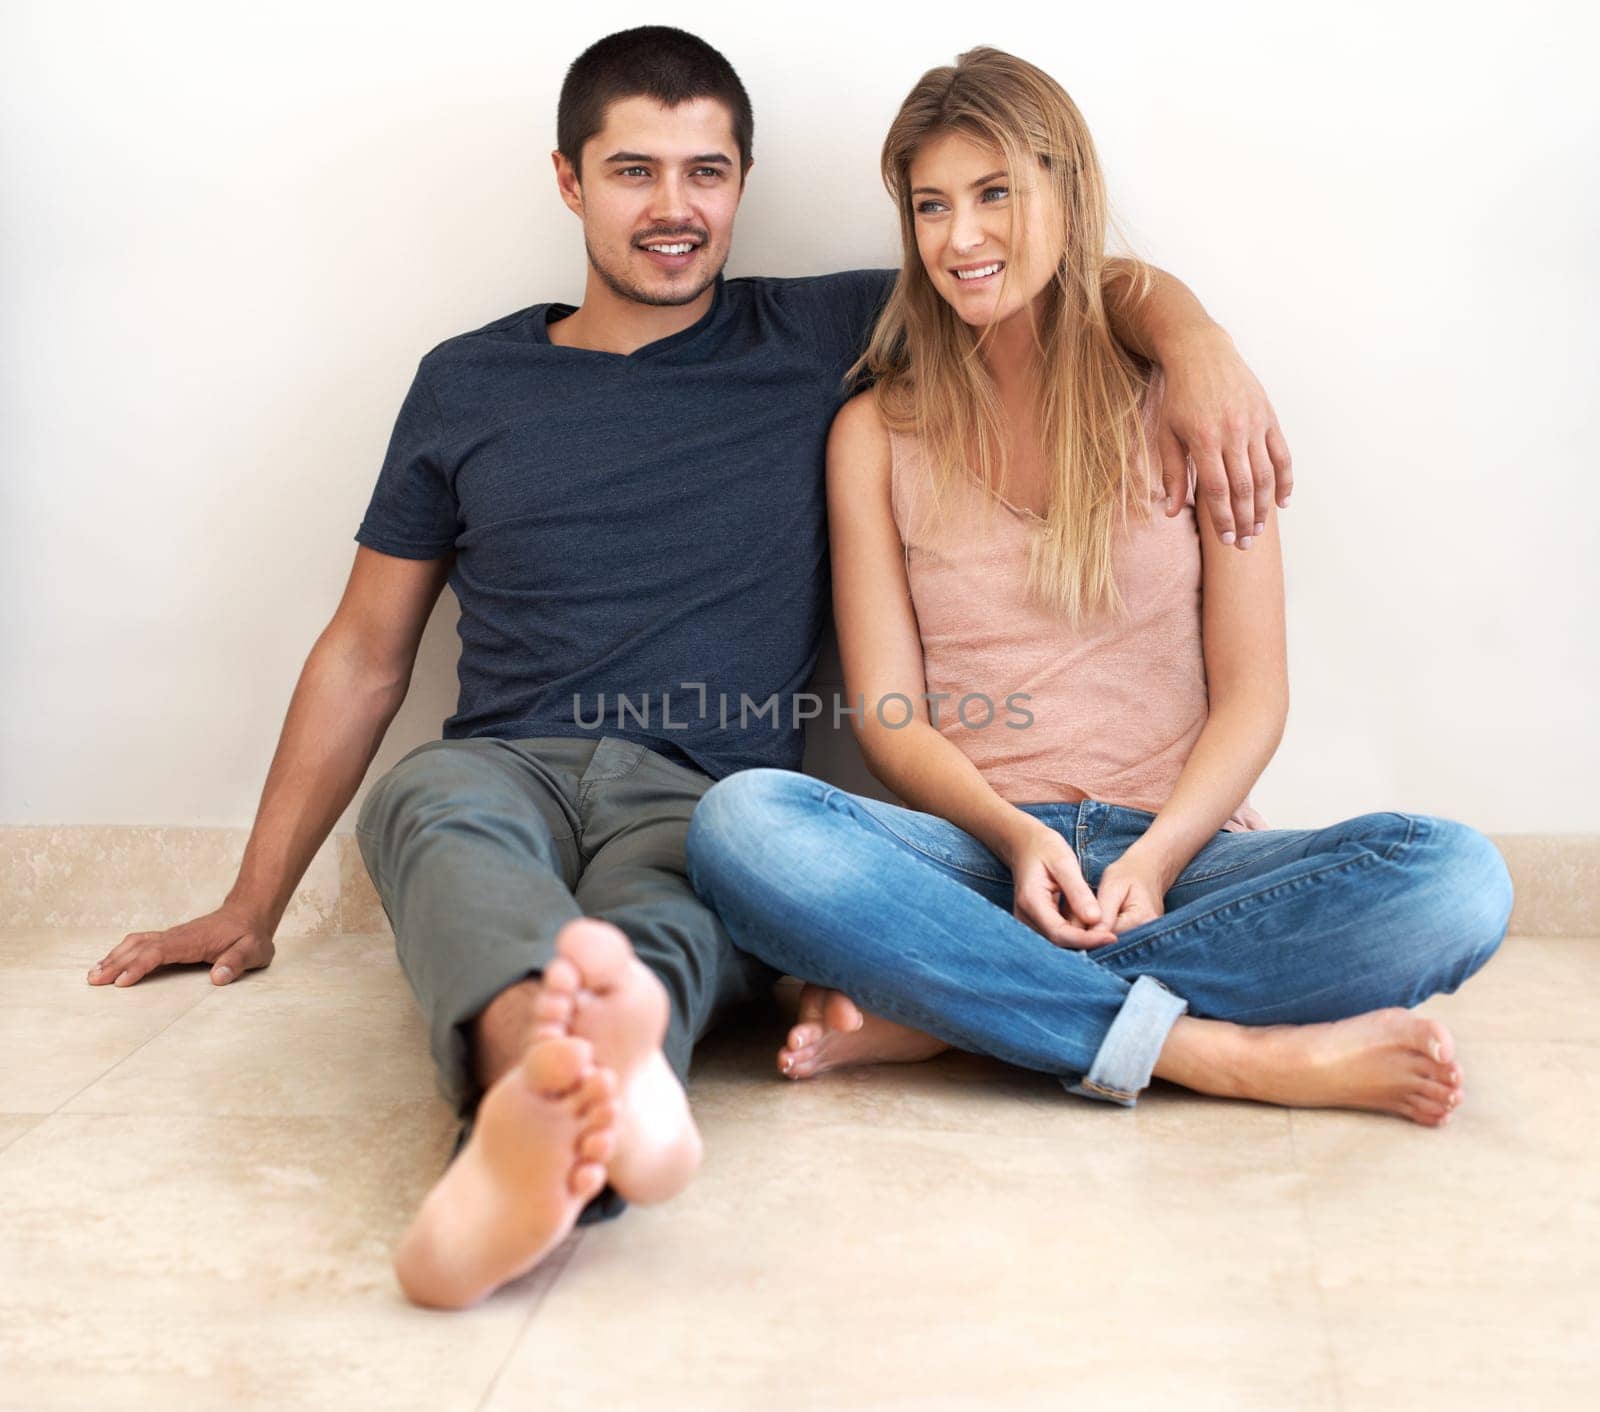 Hug, relax and couple on the floor of their new house talking, bond and excited for real estate success. Property, moving and man and woman sitting on living room ground together in their dream home by YuriArcurs